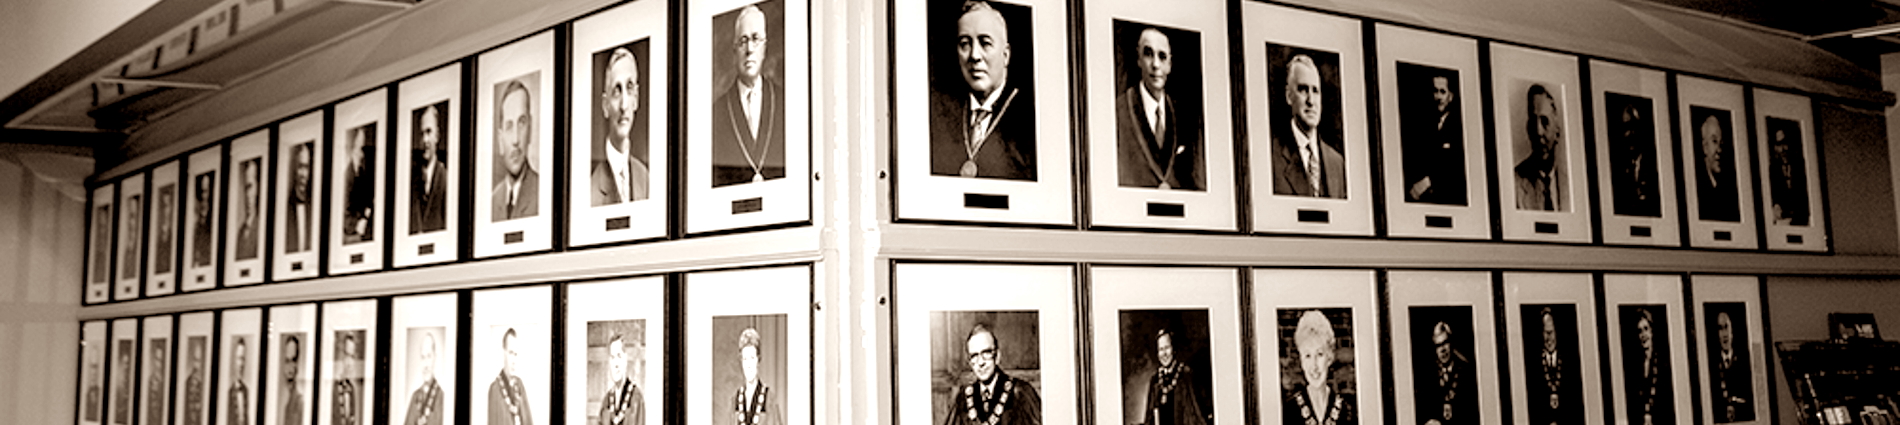 Past Mayors of Belleville